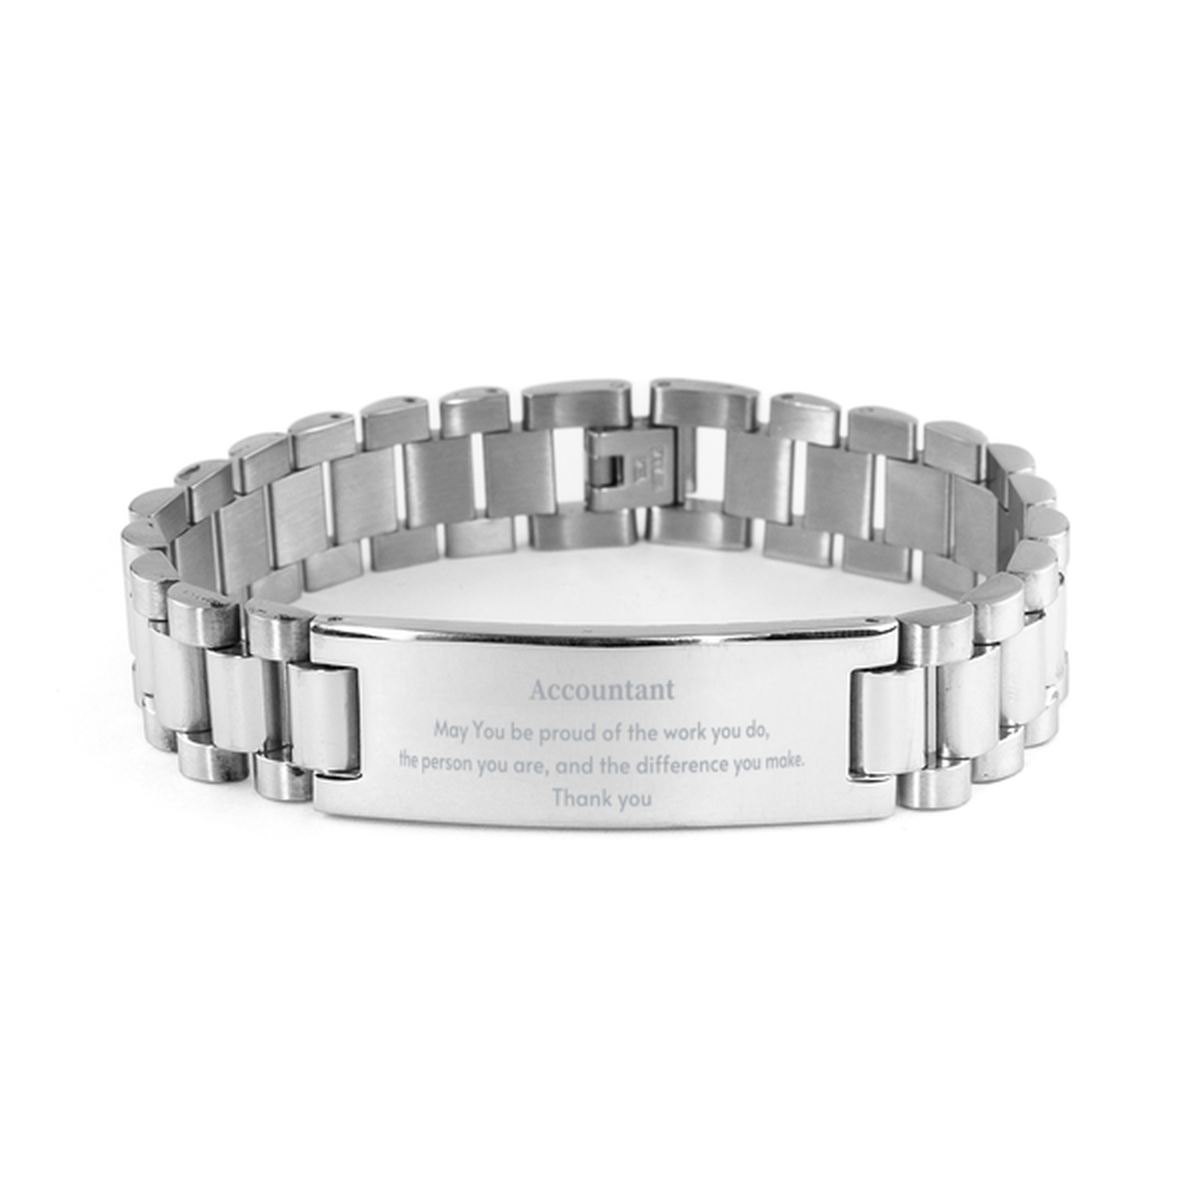 Heartwarming Ladder Stainless Steel Bracelet Retirement Coworkers Gifts for Accountant, Accountant May You be proud of the work you do, the person you are Gifts for Boss Men Women Friends